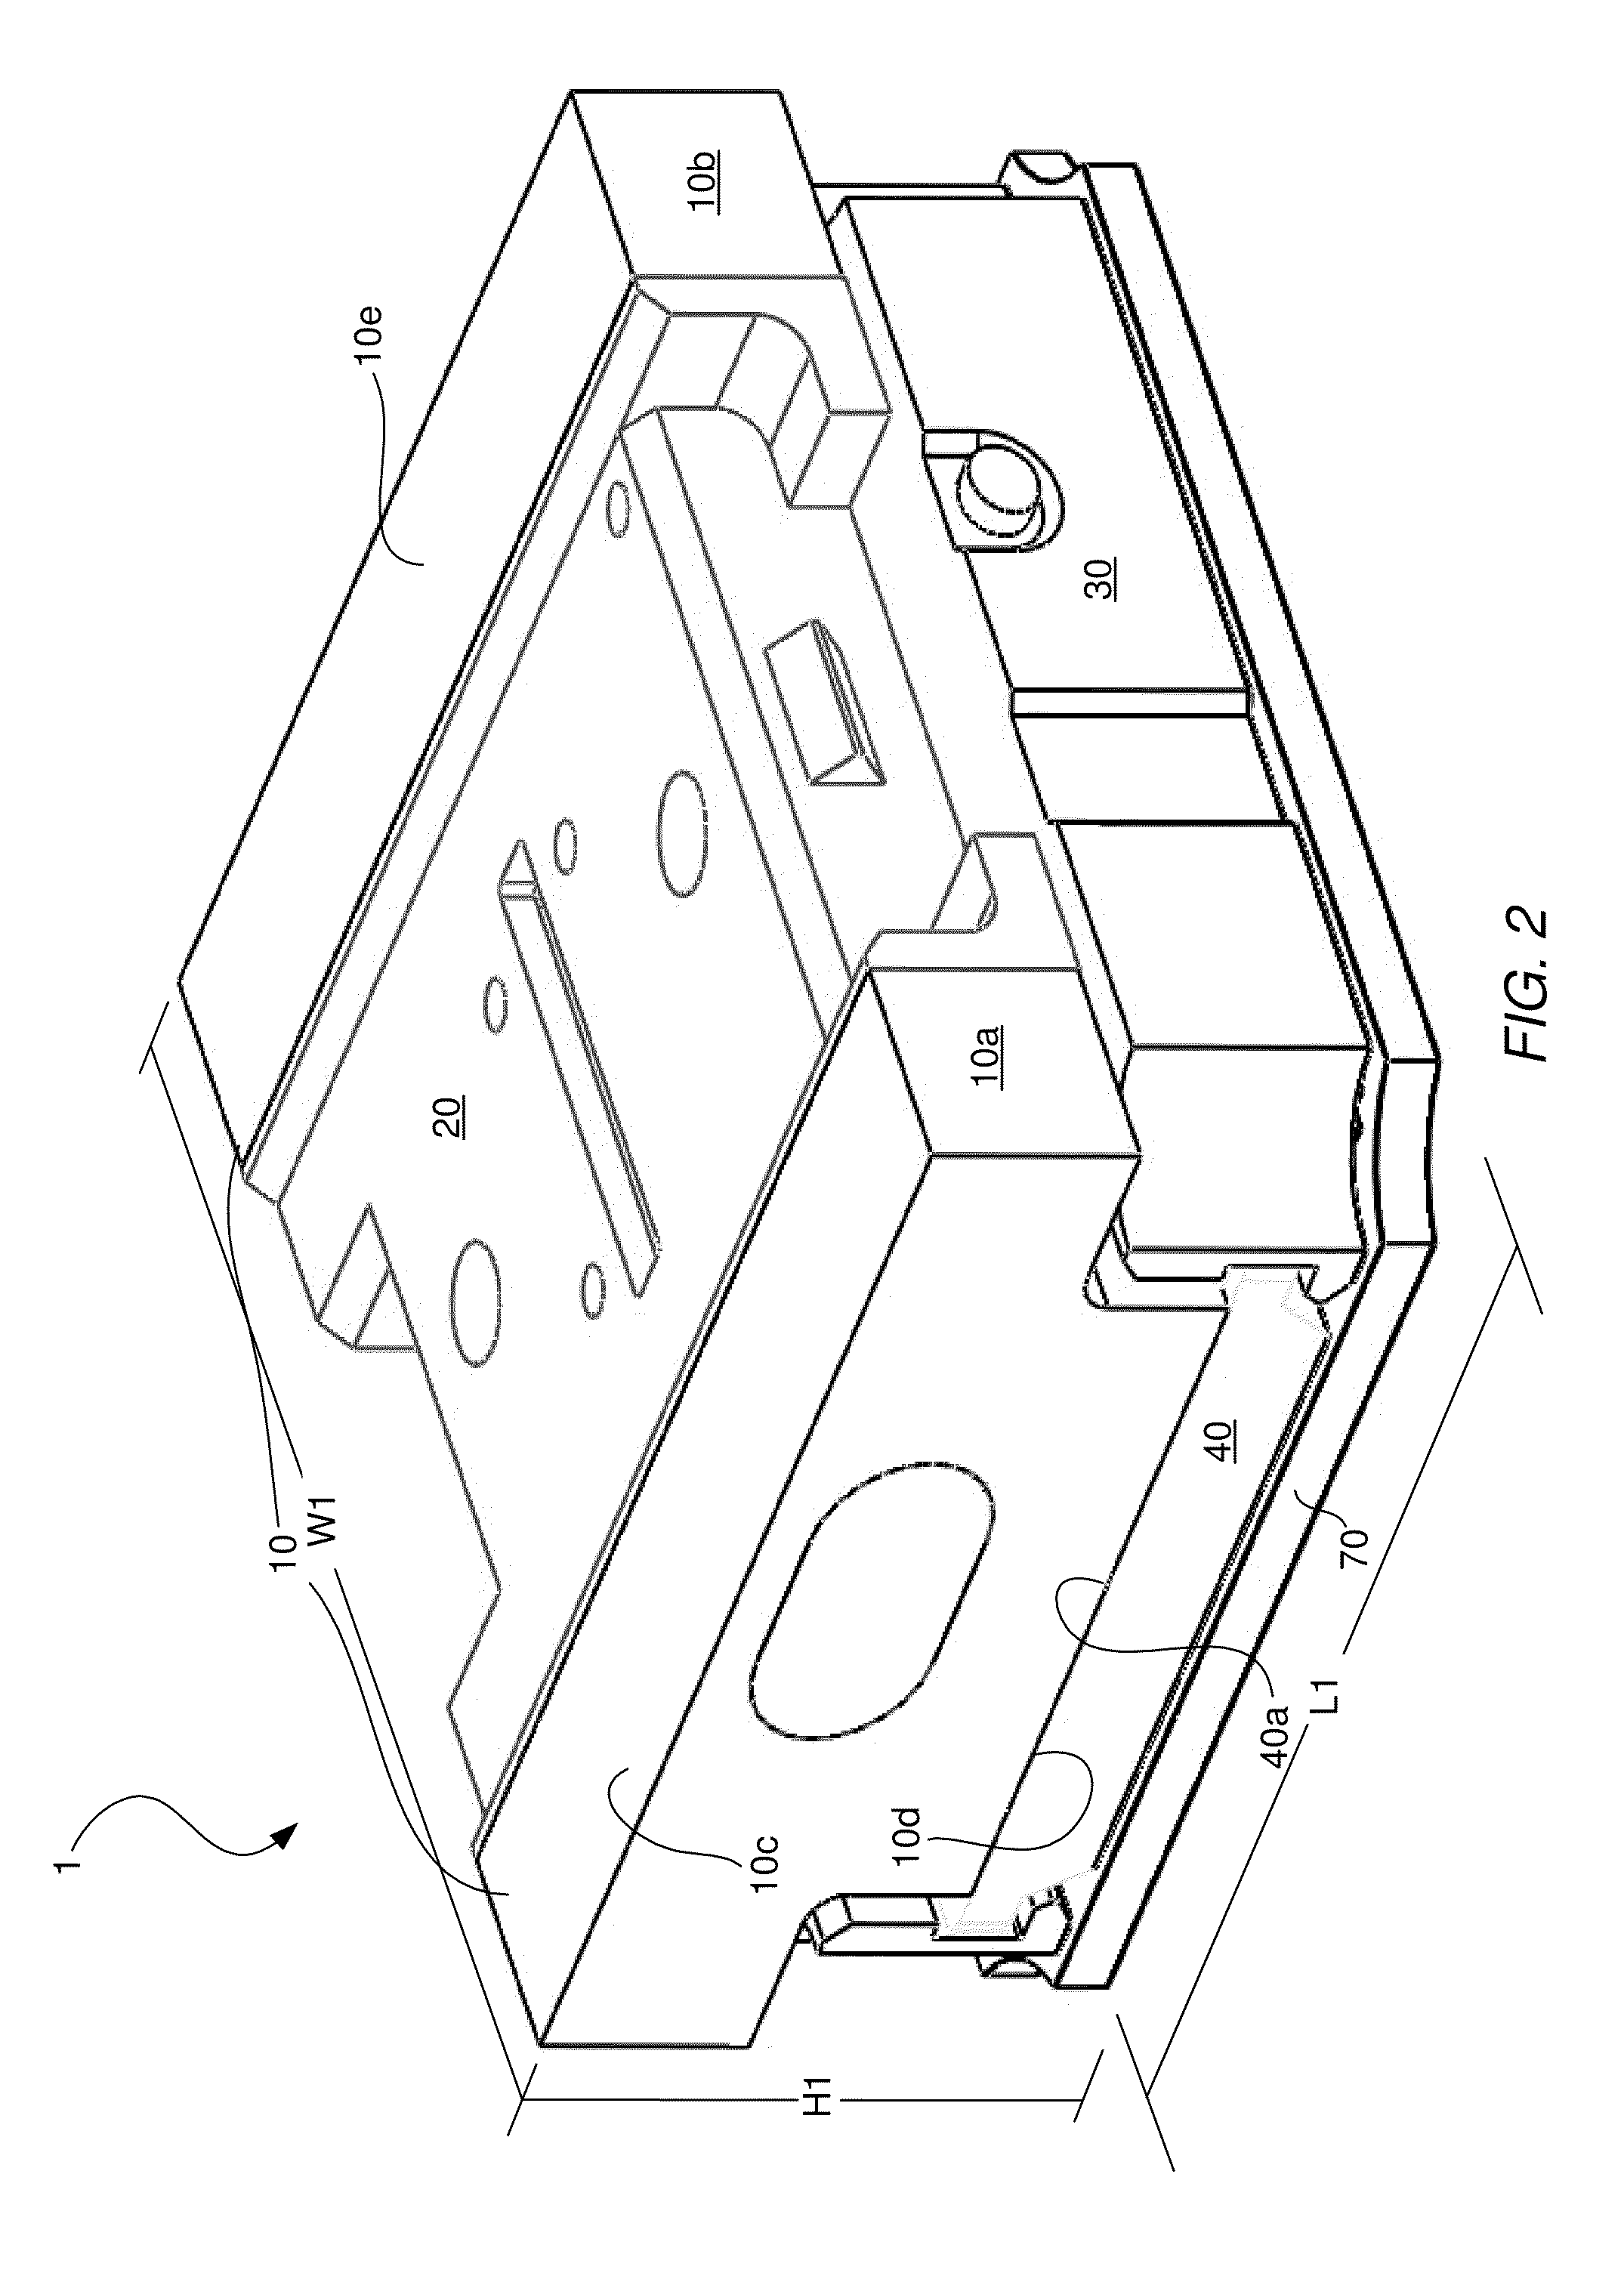 Protective socket for use with a parallel optical transceiver module for protecting components of the module from airborne matter